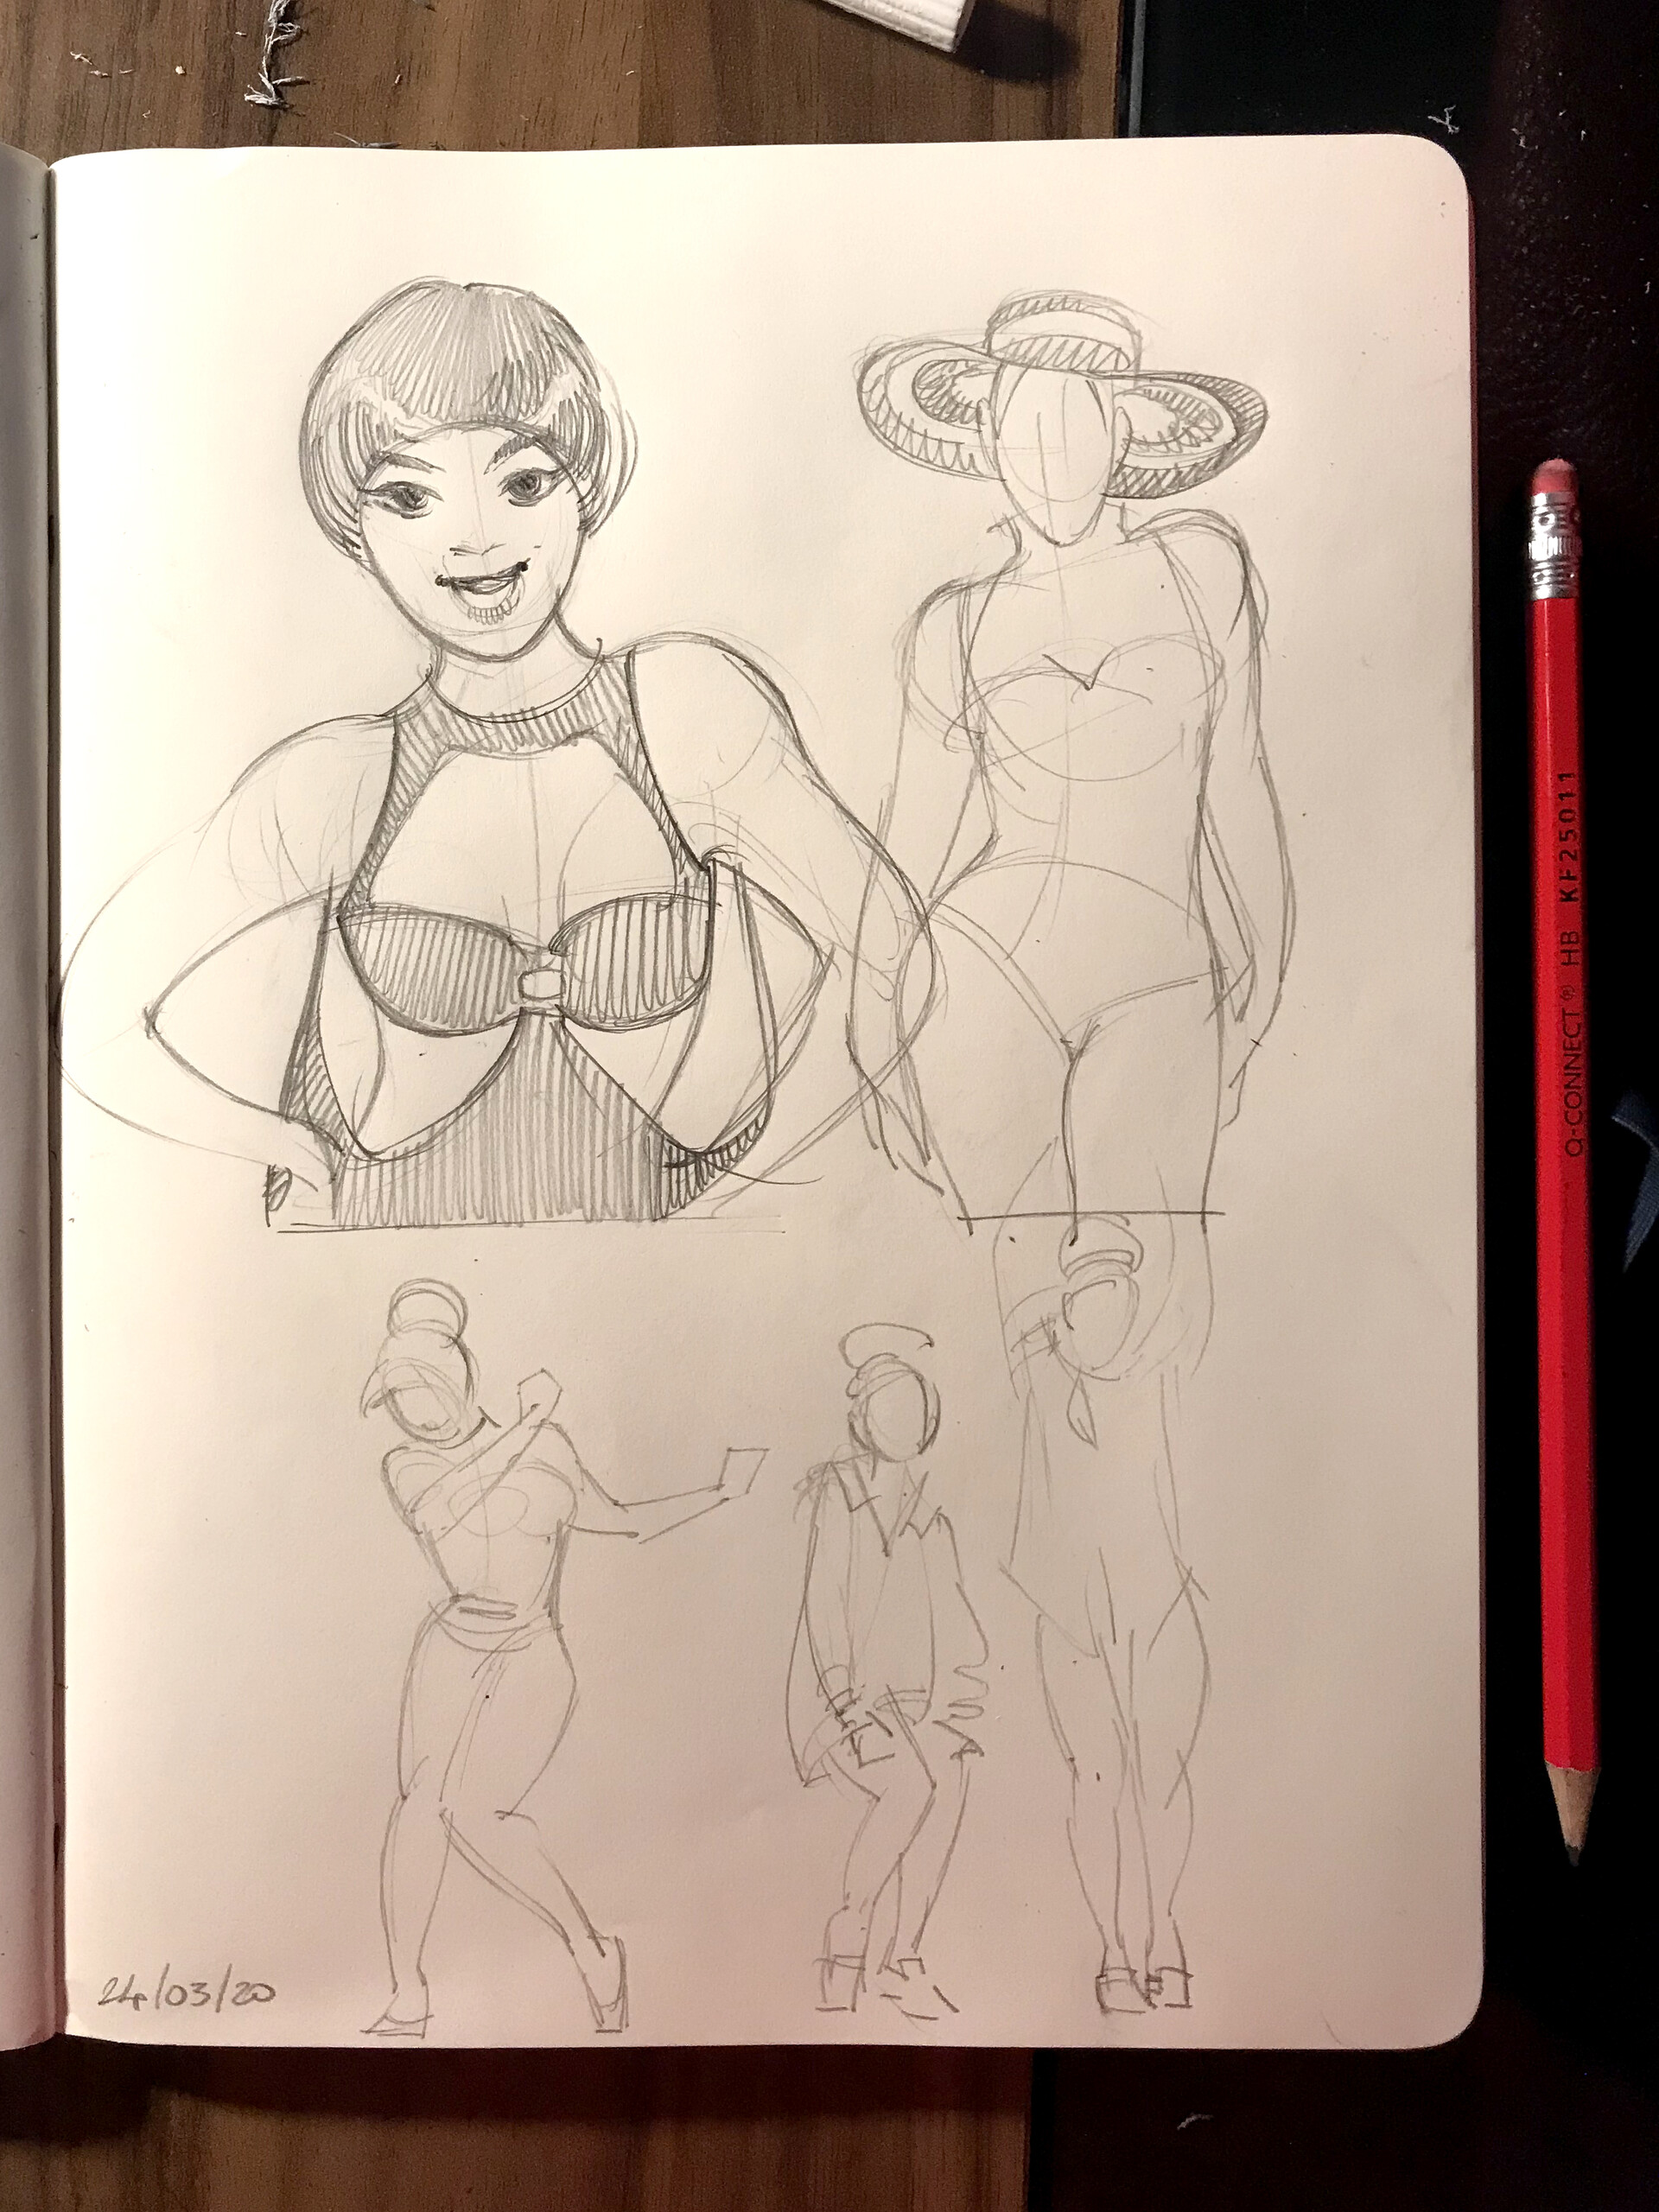 ArtStation - Some Life drawing sketches from the pocket sketchbook